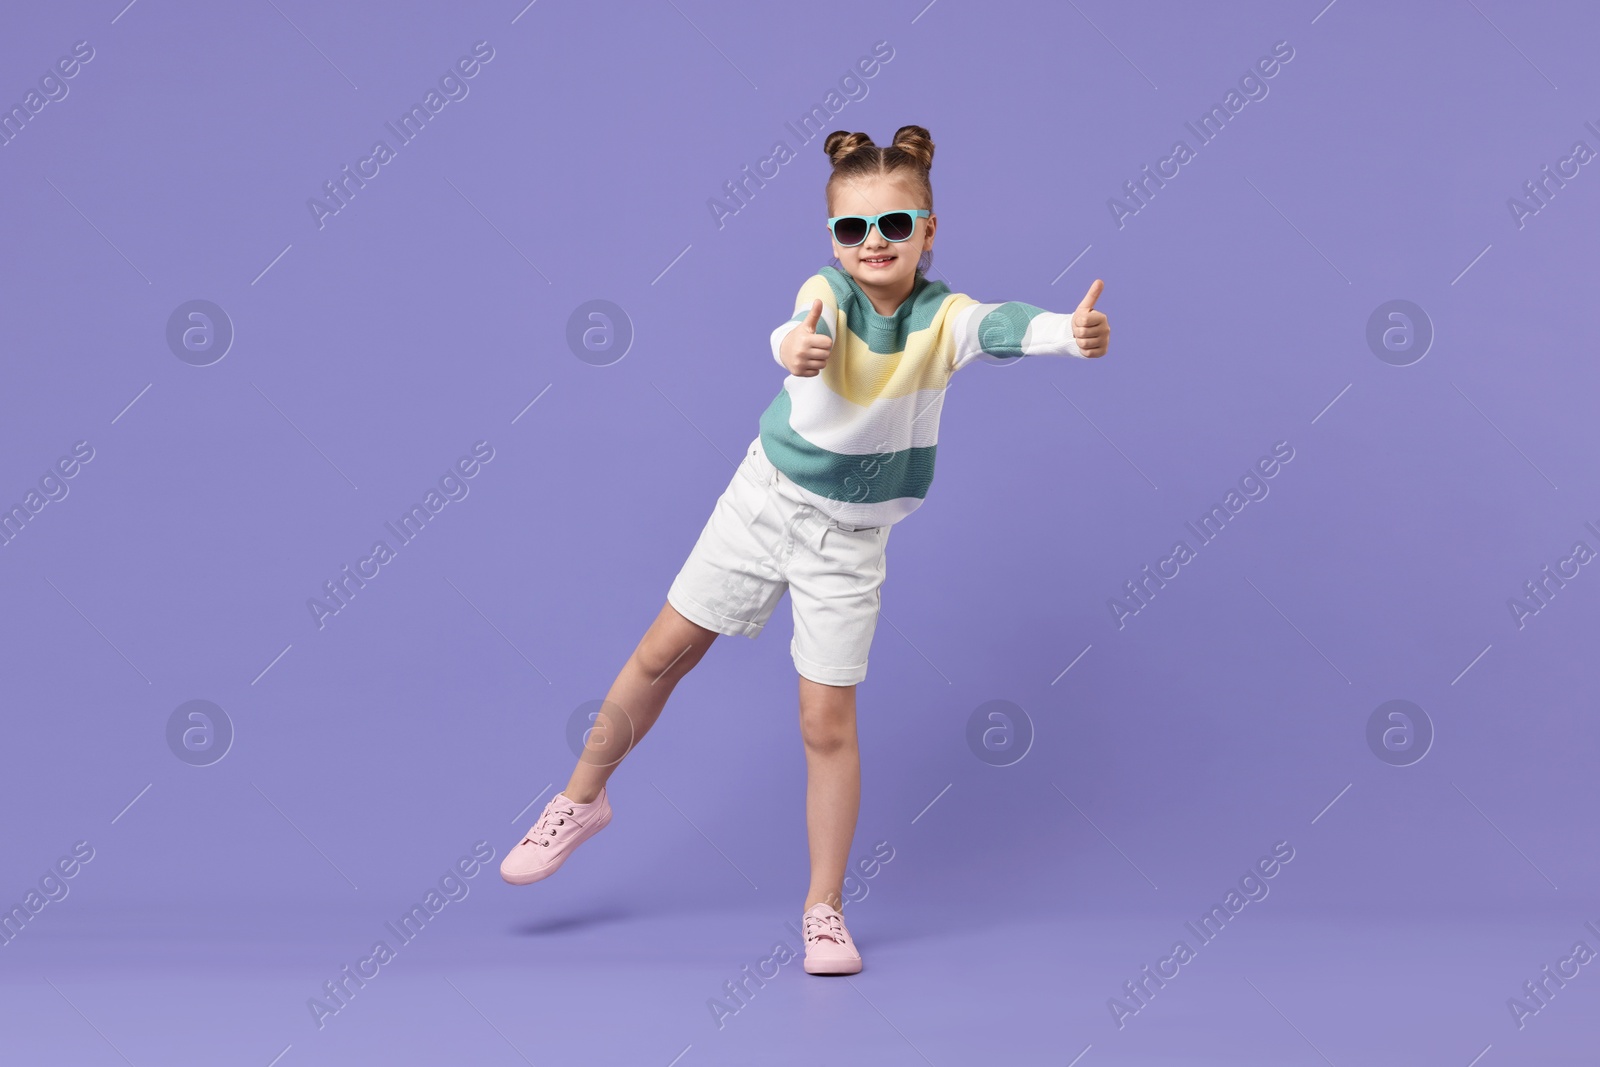 Photo of Cute little girl in sunglasses showing thumbs up while dancing on violet background